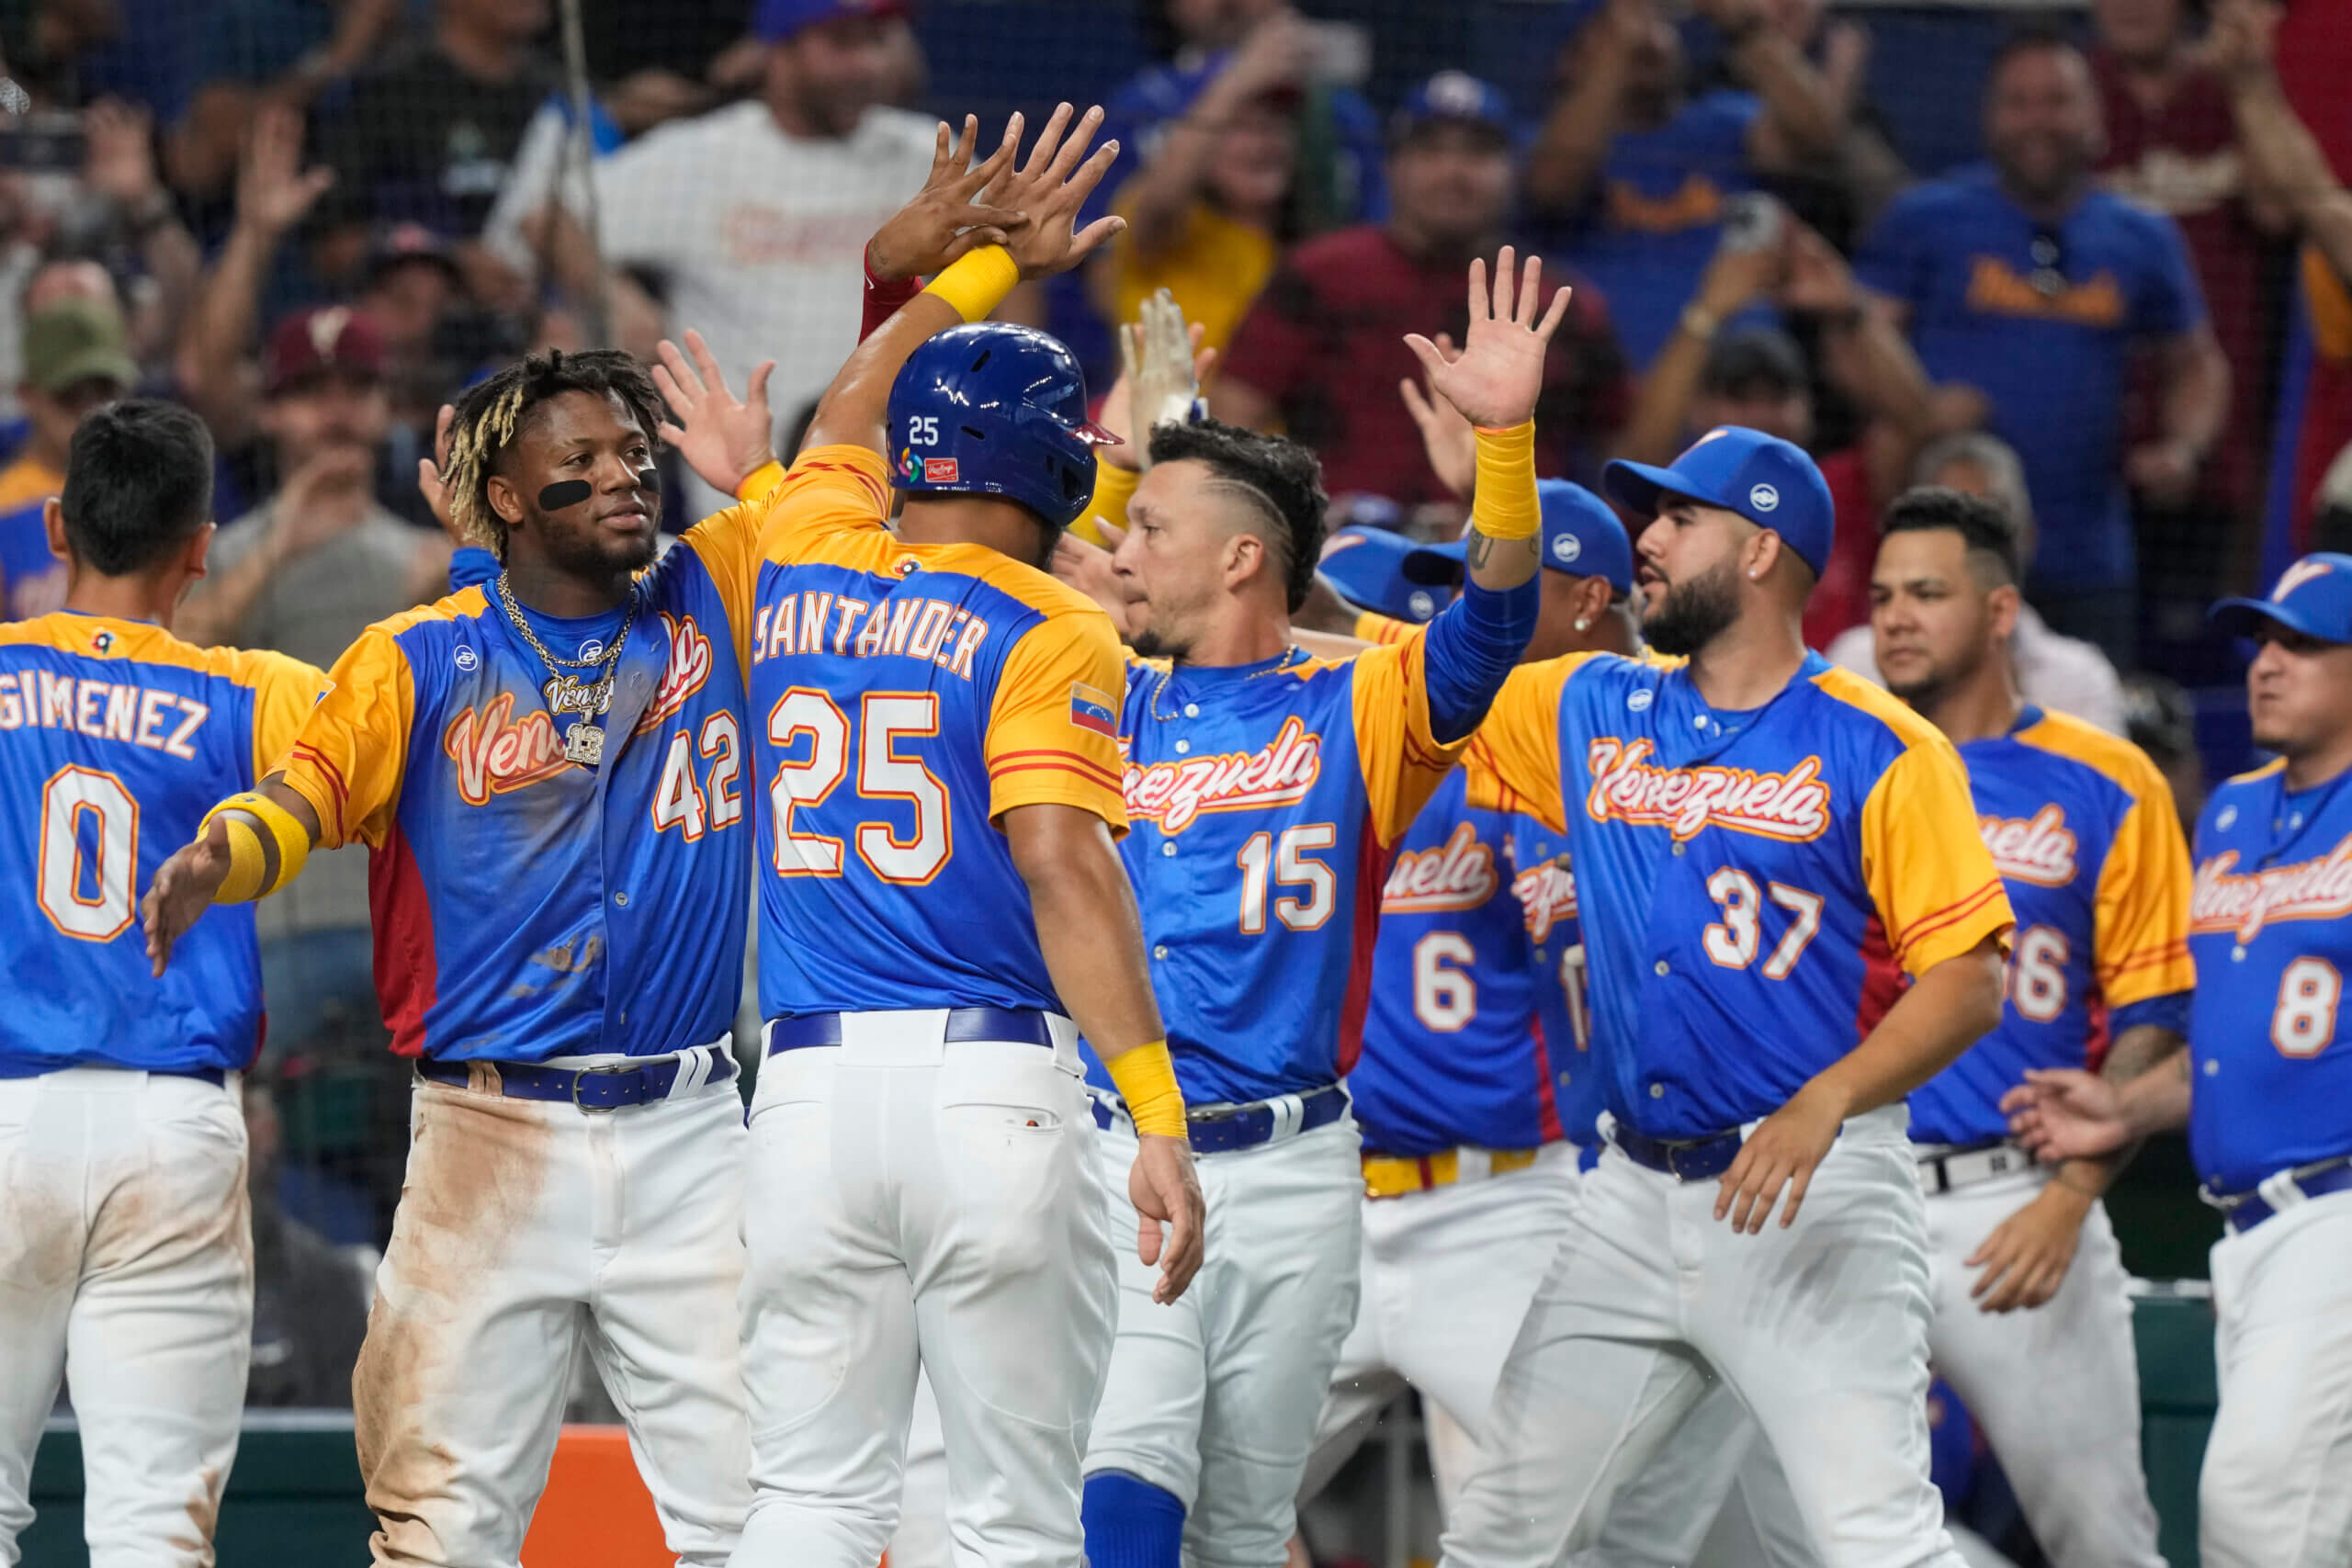 Venezuela 2023 WBC Current Roster and Predictions 